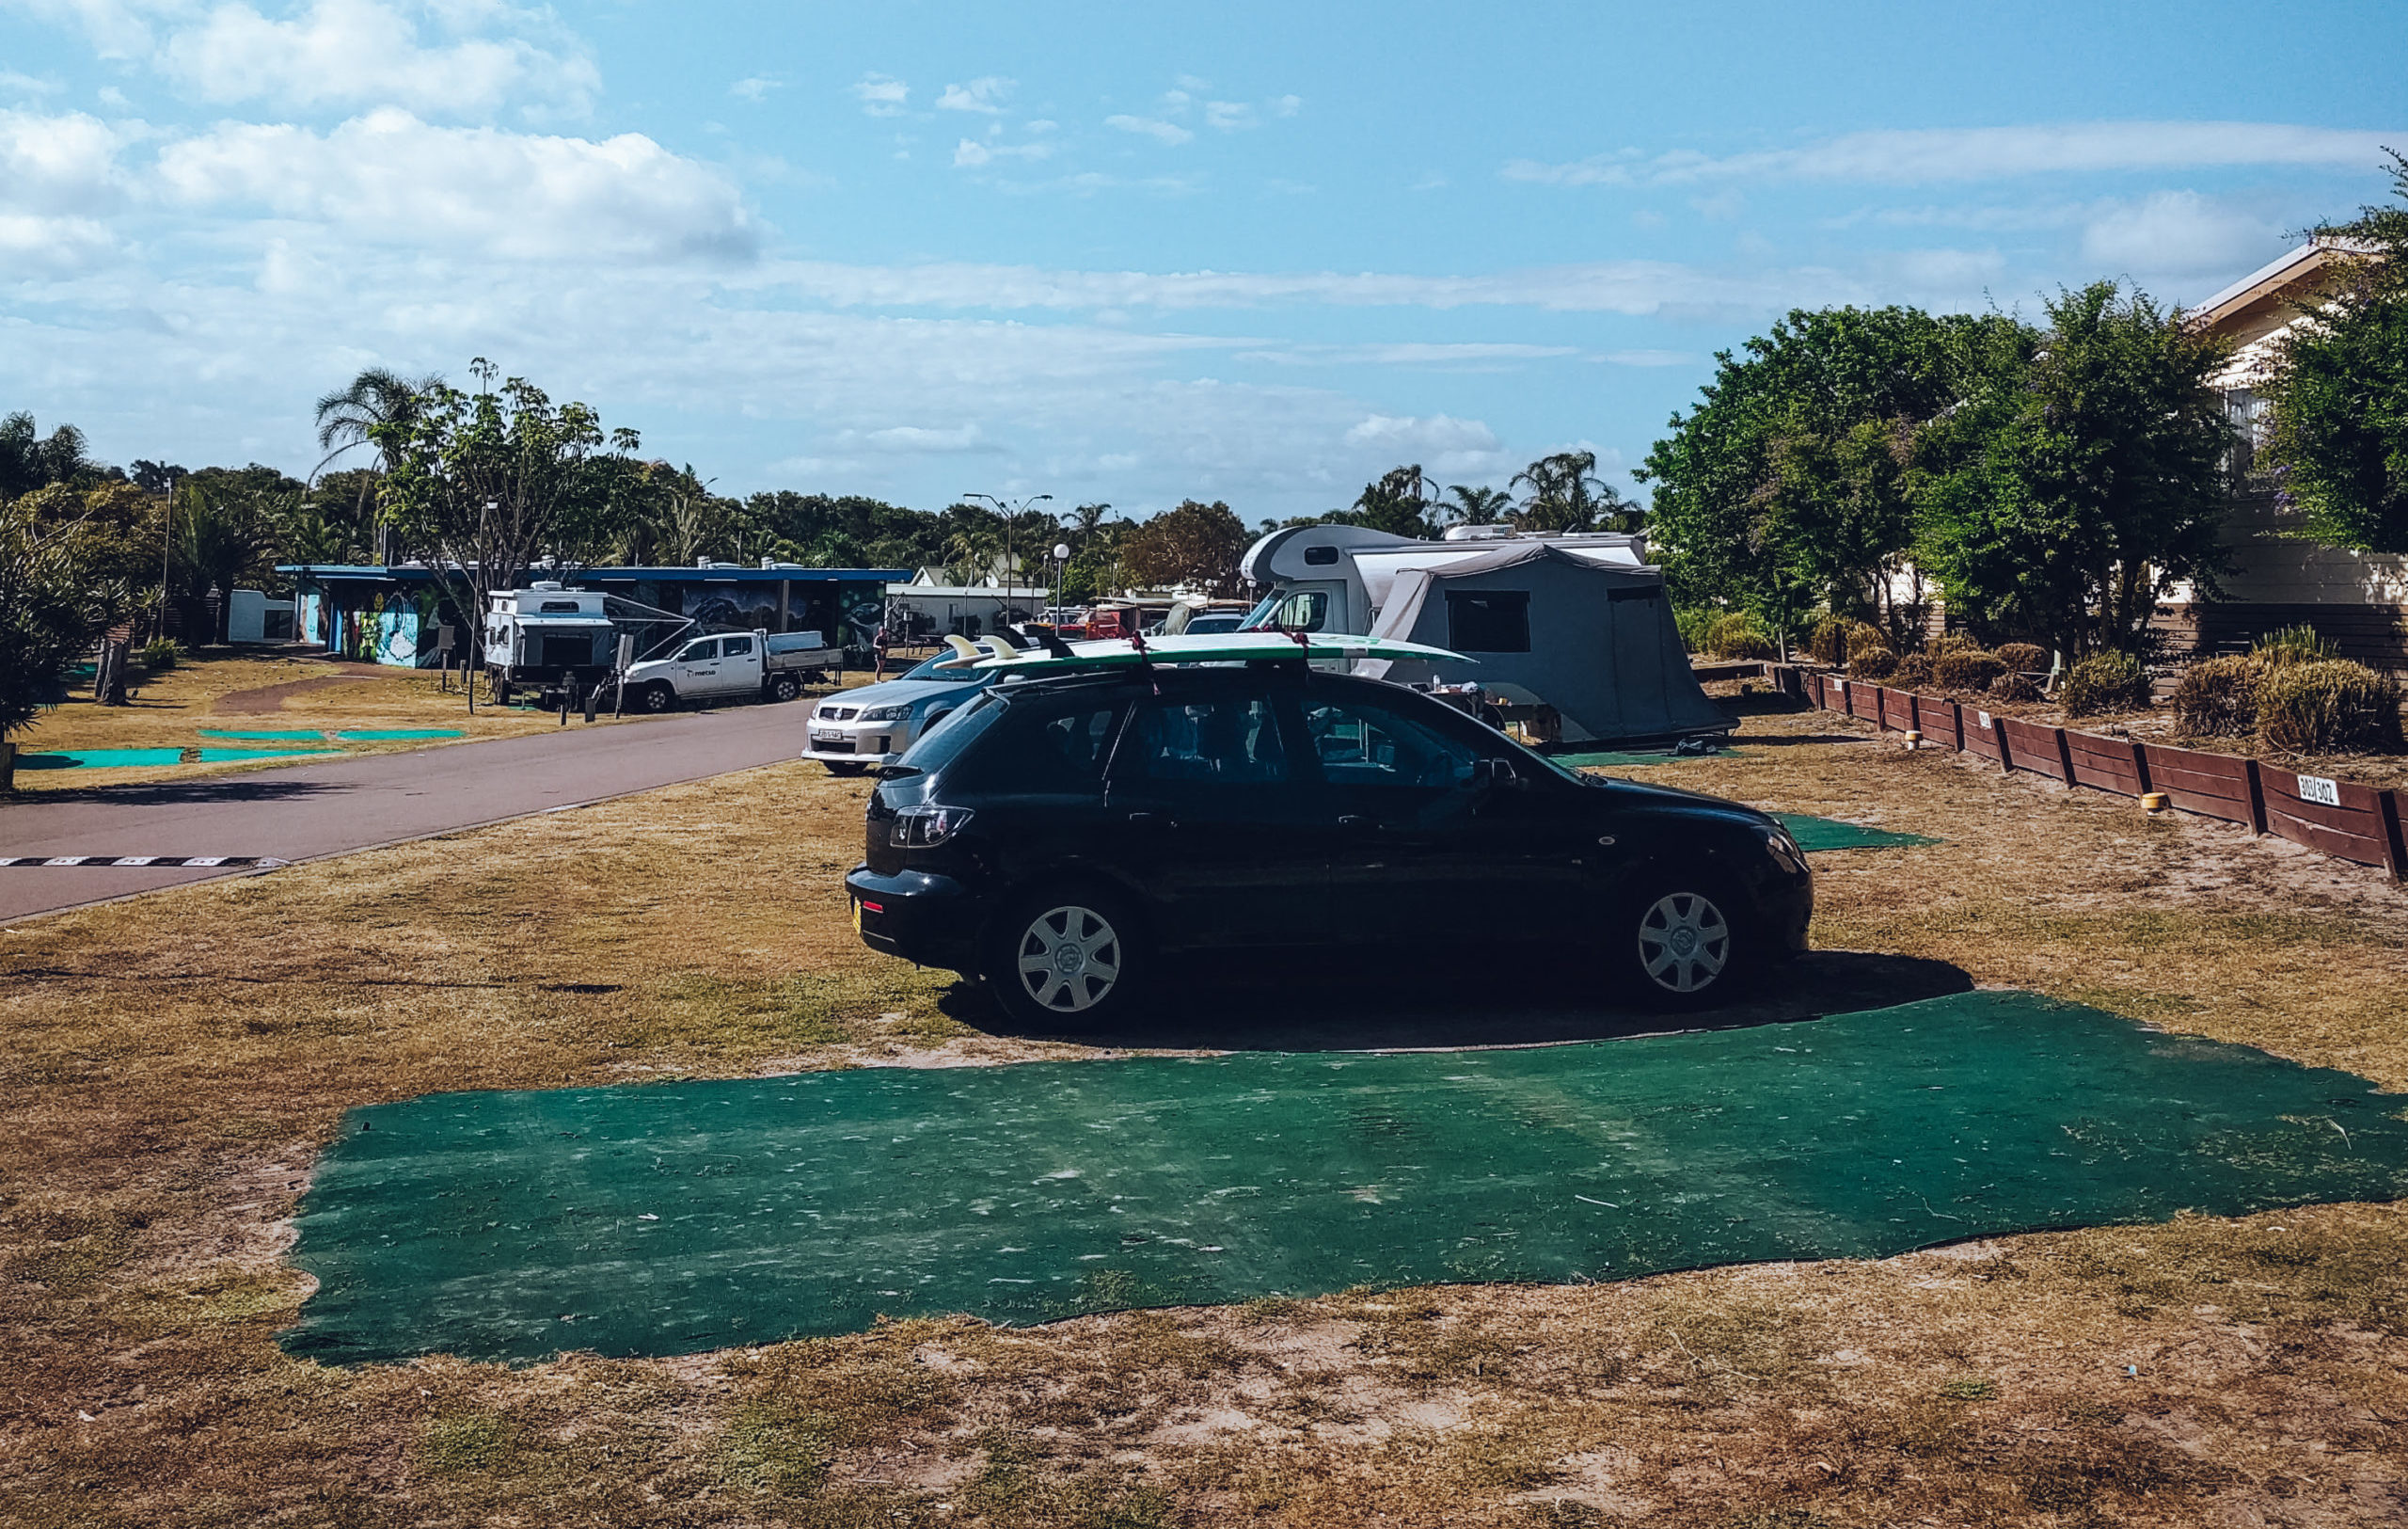 Camping in Port Stephens